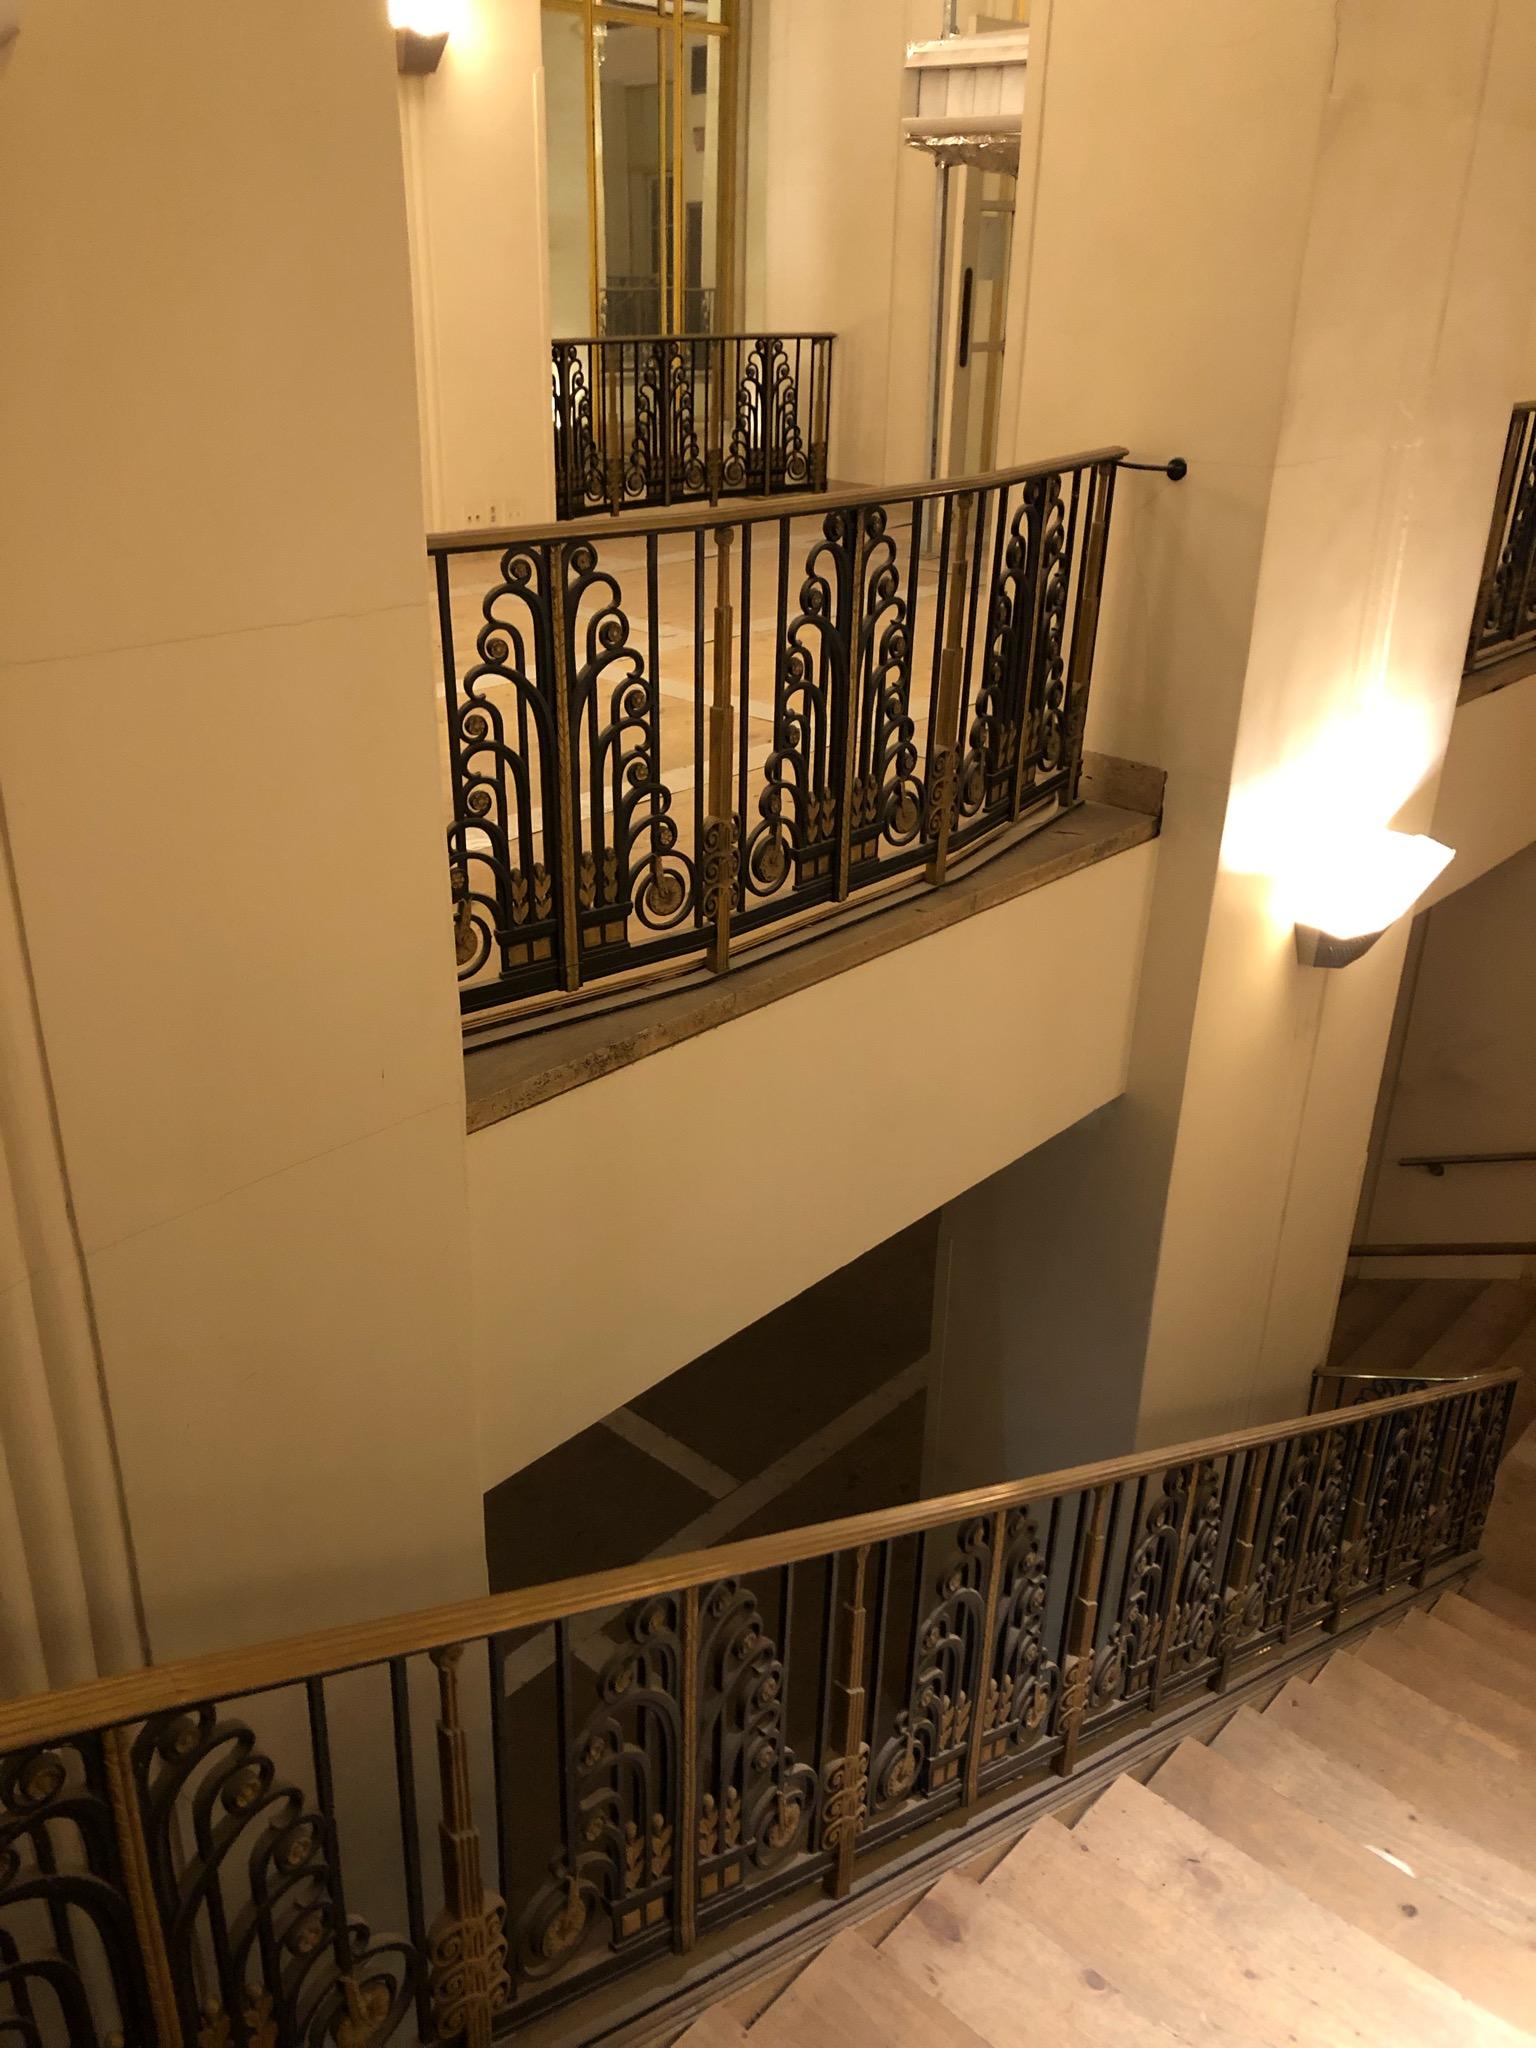 Original 1931 black and gold bronze and steel Art Deco balcony from the Starlight Ballroom of the NYC Waldorf Astoria Hotel on Park Avenue, New York City. There are minor original bends in each. Small quantity available at time of posting. Please